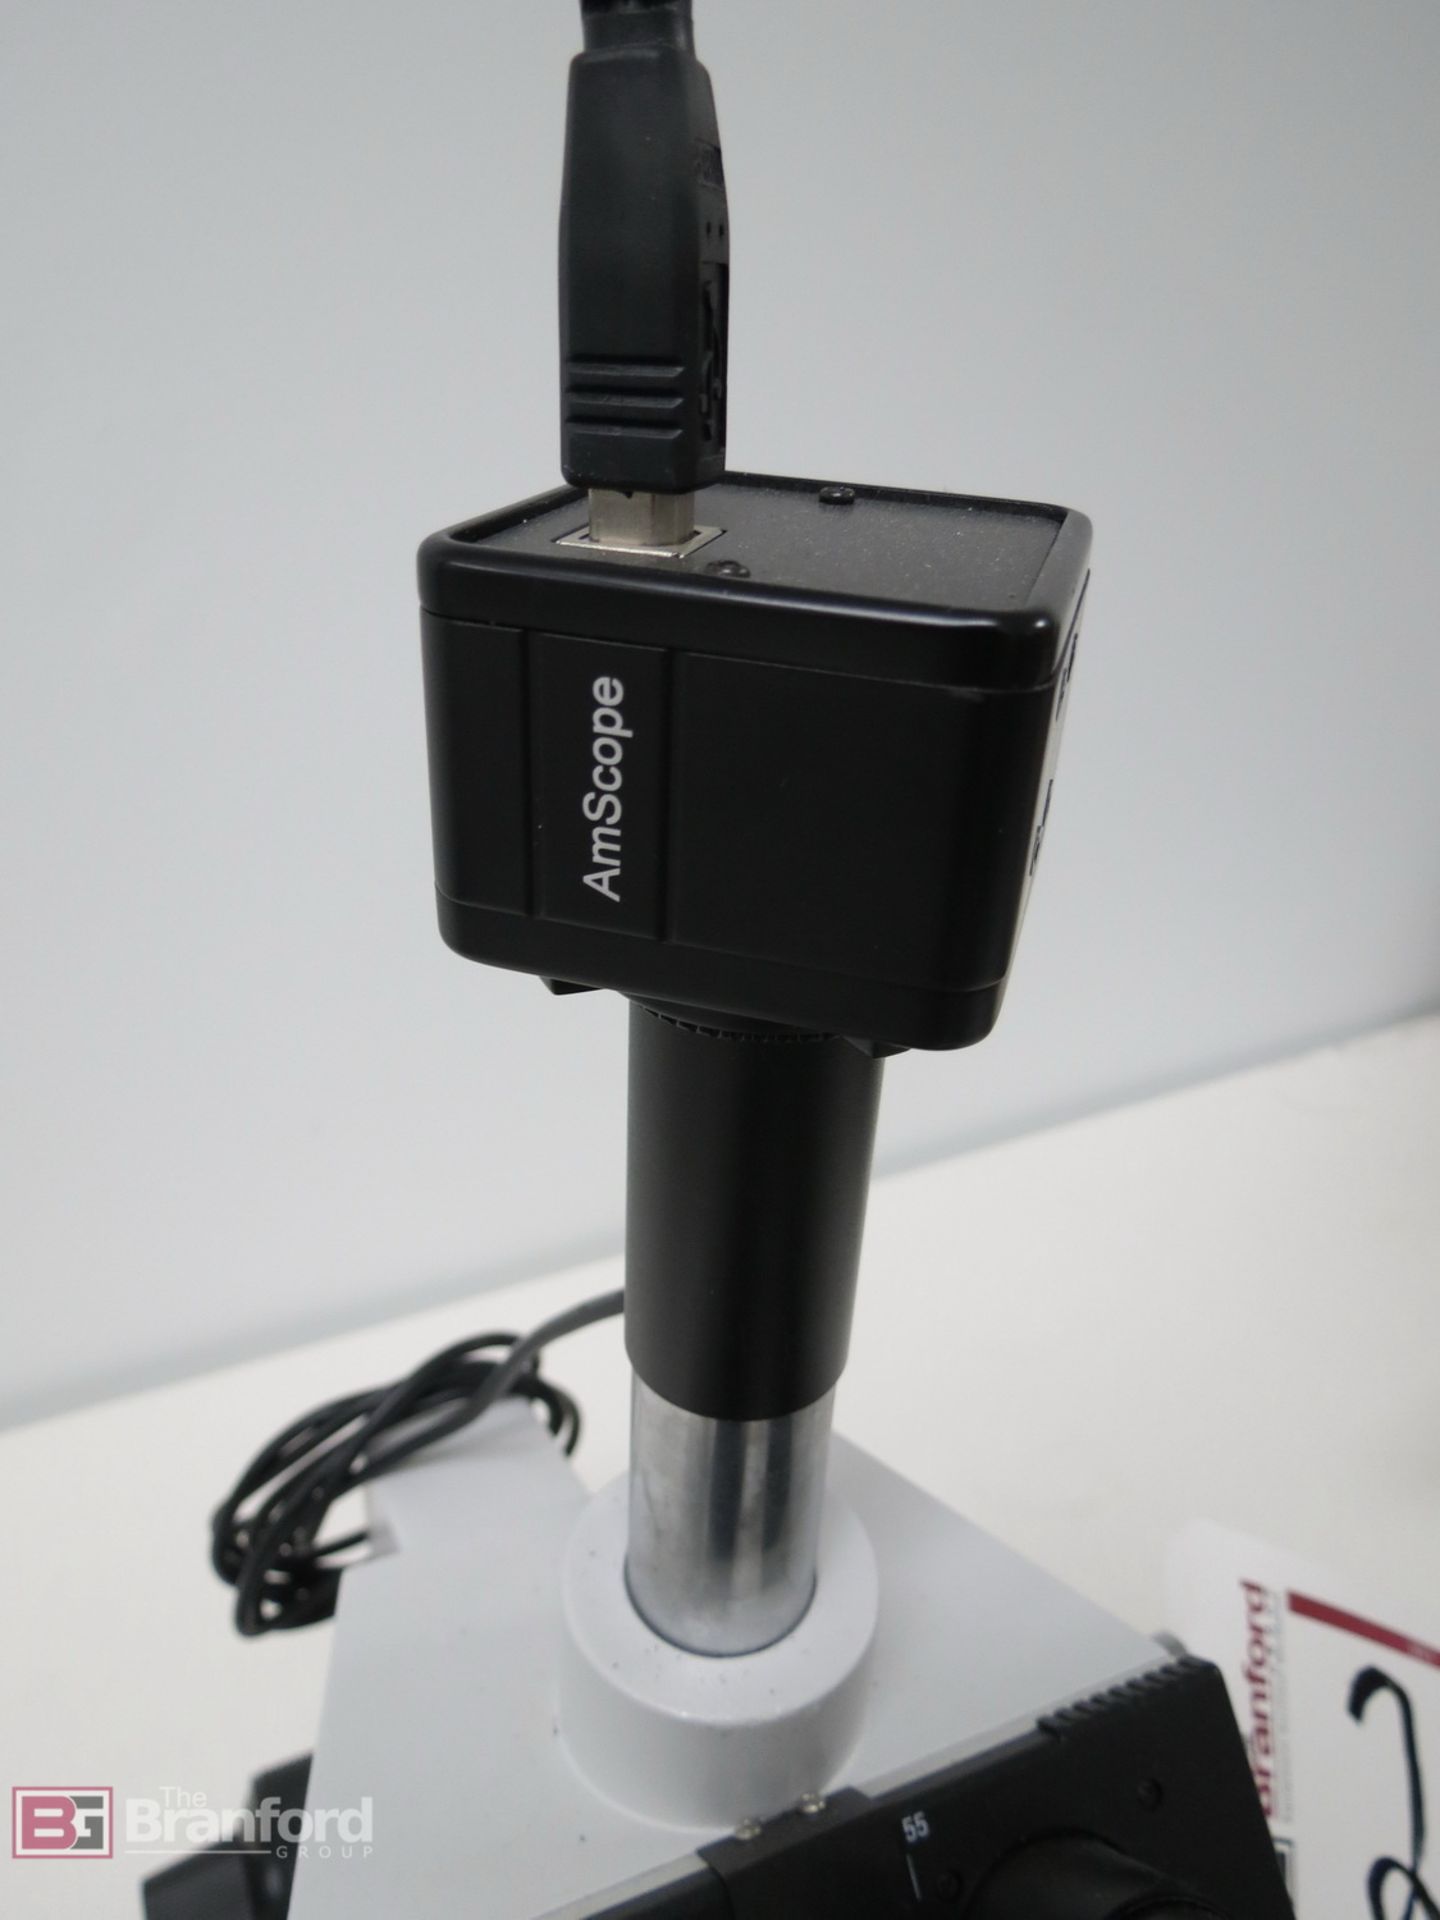 AmScope Stereo Zoom Microscope - Image 3 of 7